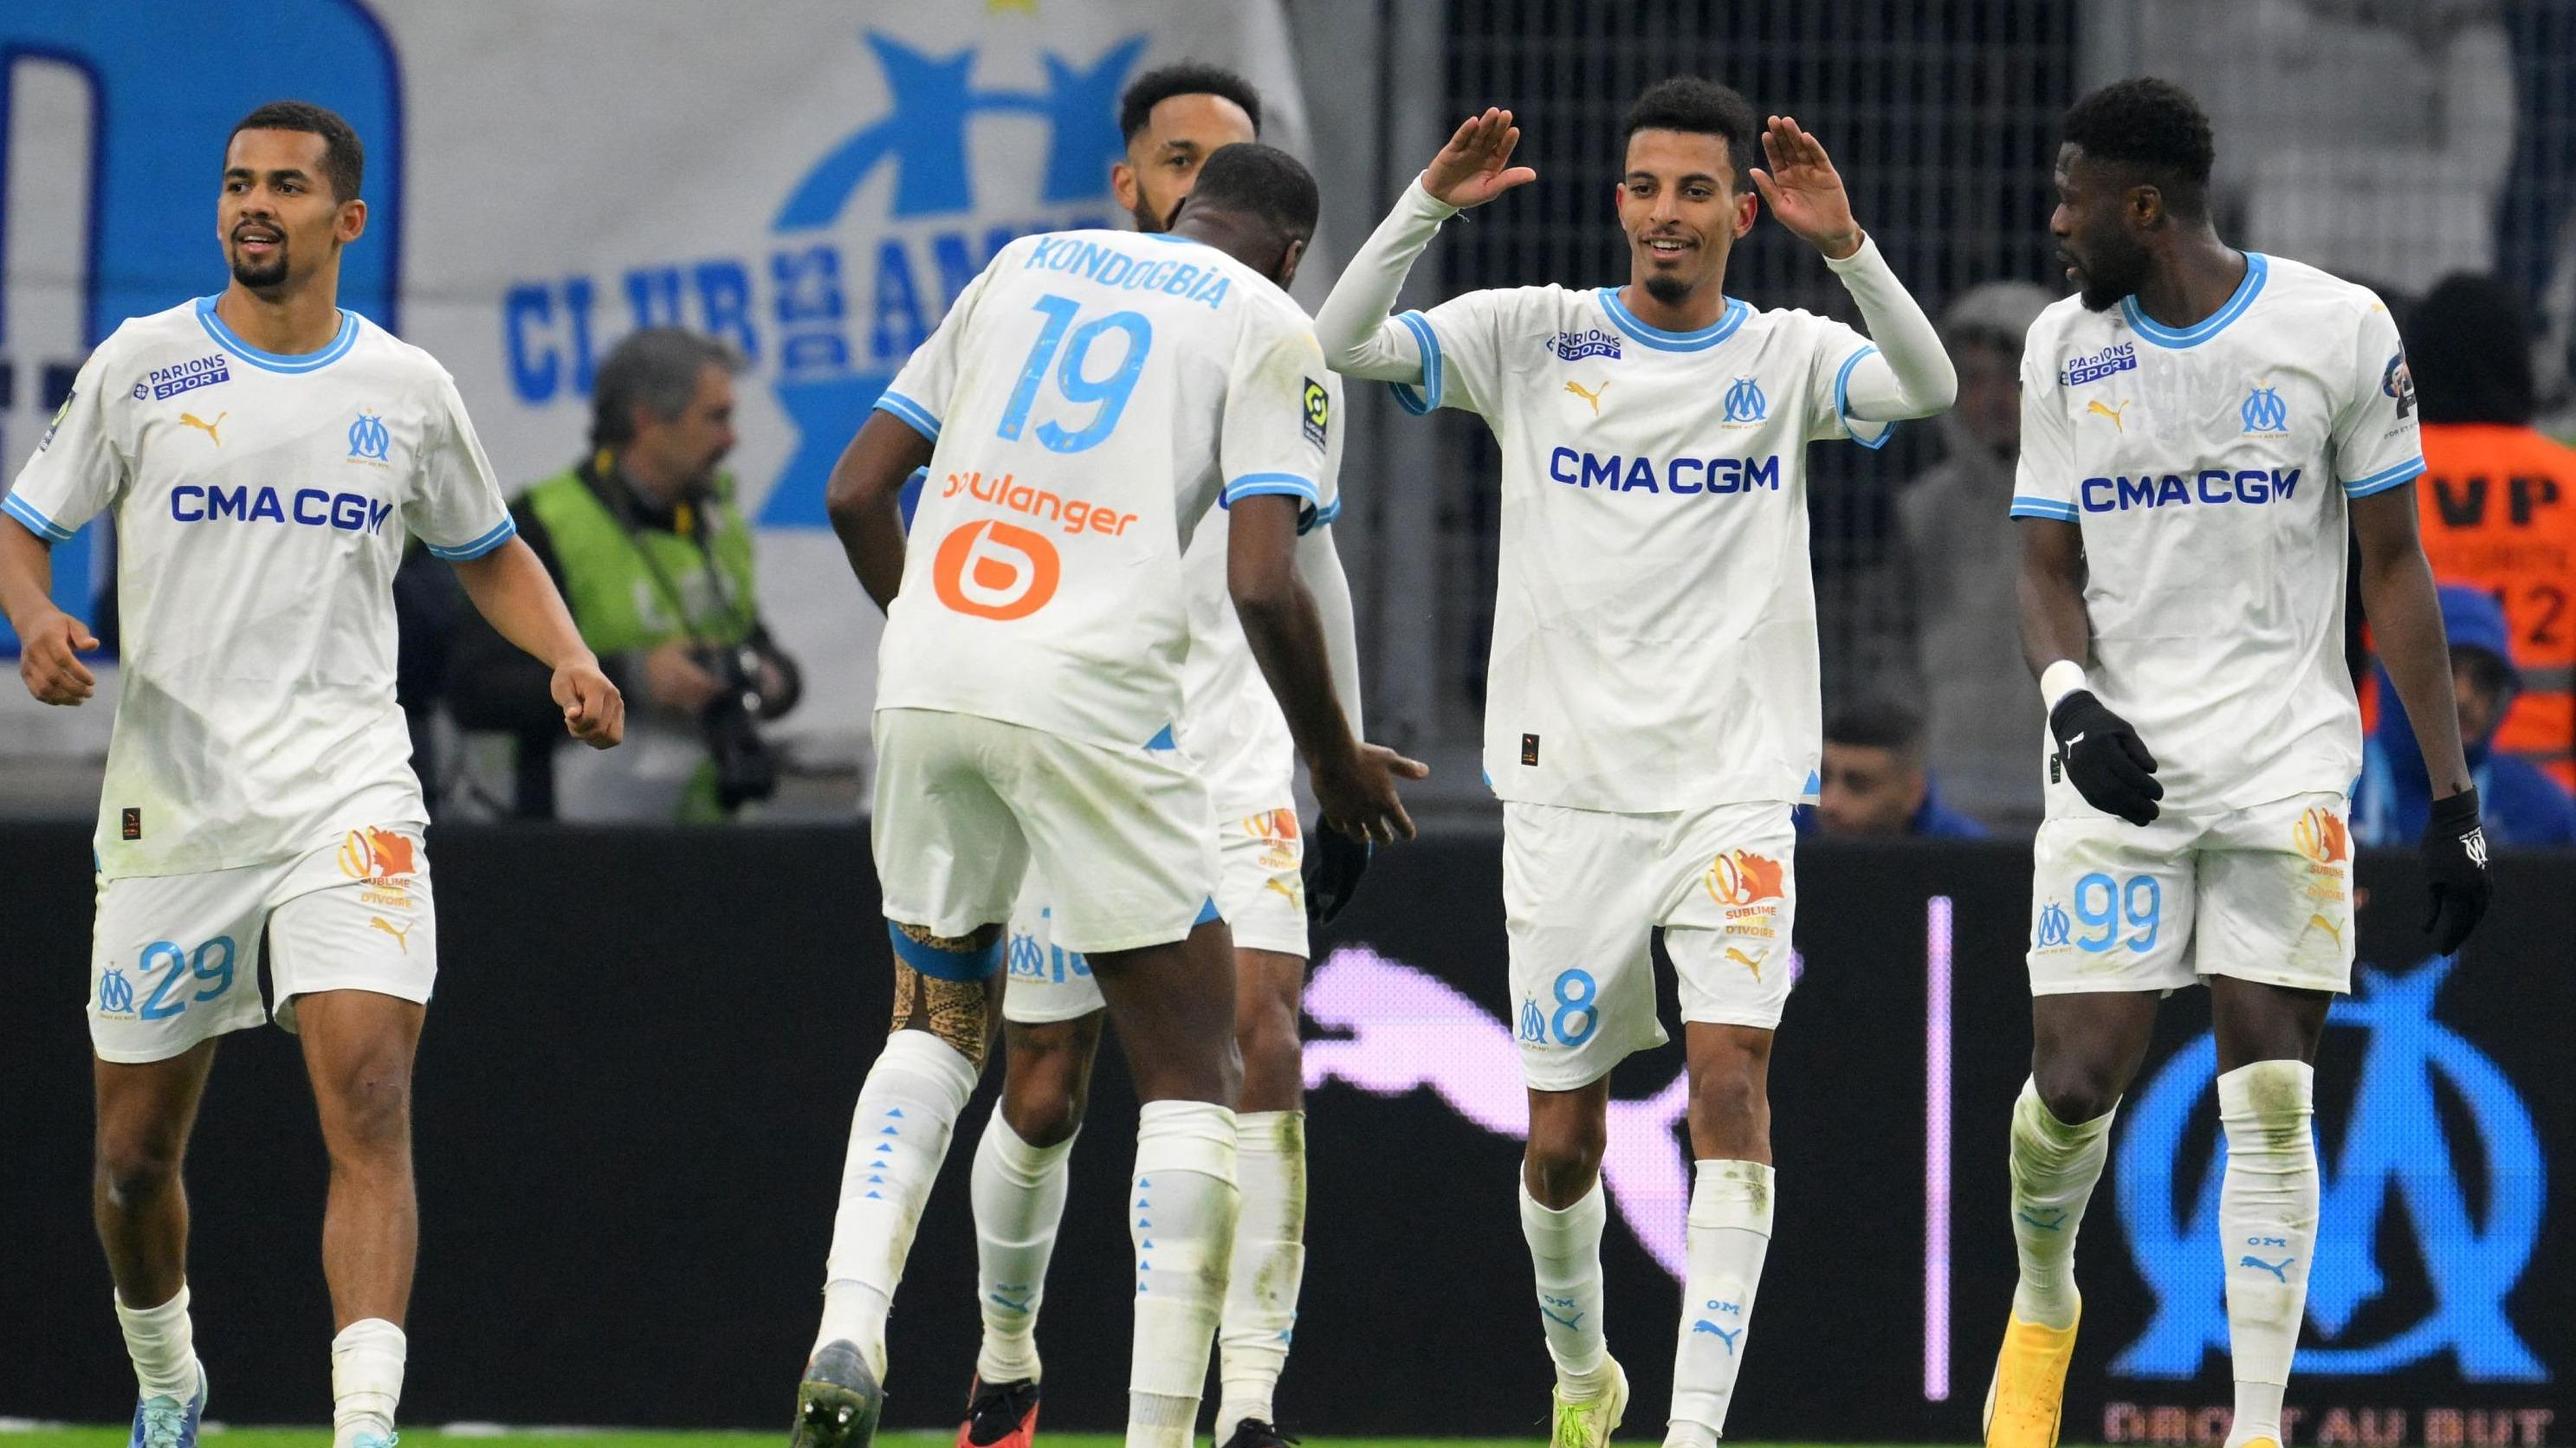 Ligue 1: at what time and on which channel to follow OM-OL?